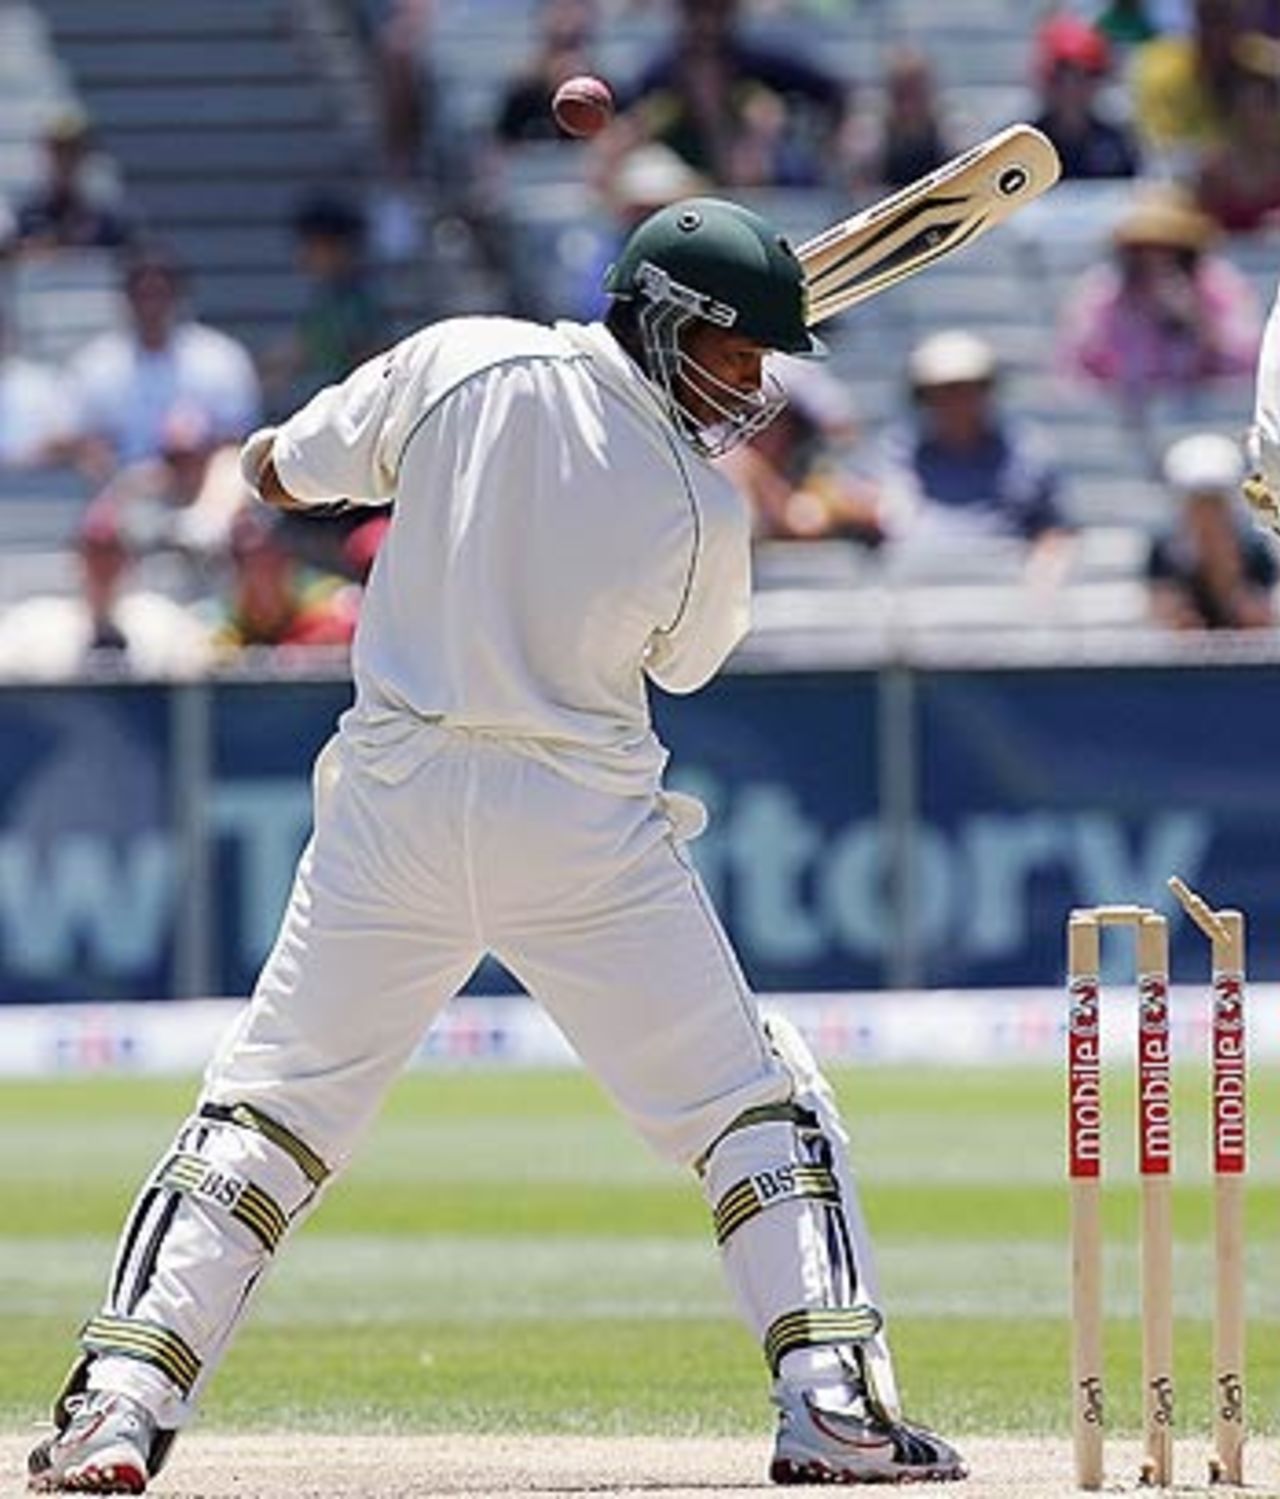 Makhaya Ntini was last man out, bowled by Stuart MacGill, Australia v South Africa, 2nd Test, Melbourne, 4th day, December 30, 2005